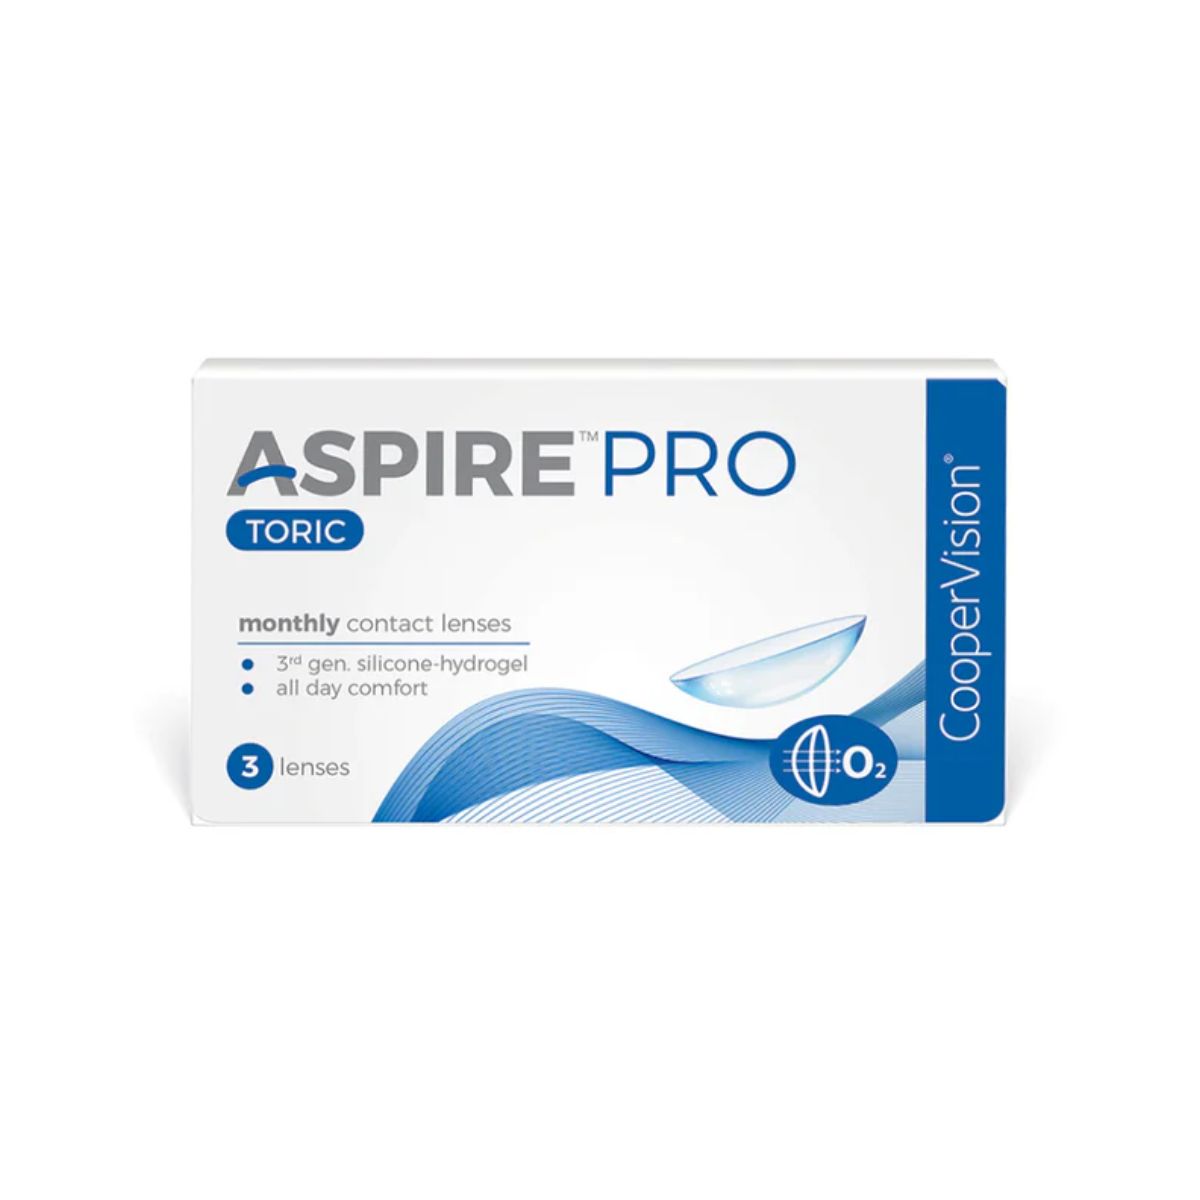 "Aspire Pro Toric Monthly Disposable Lenses (3-pack) From CooperVision"